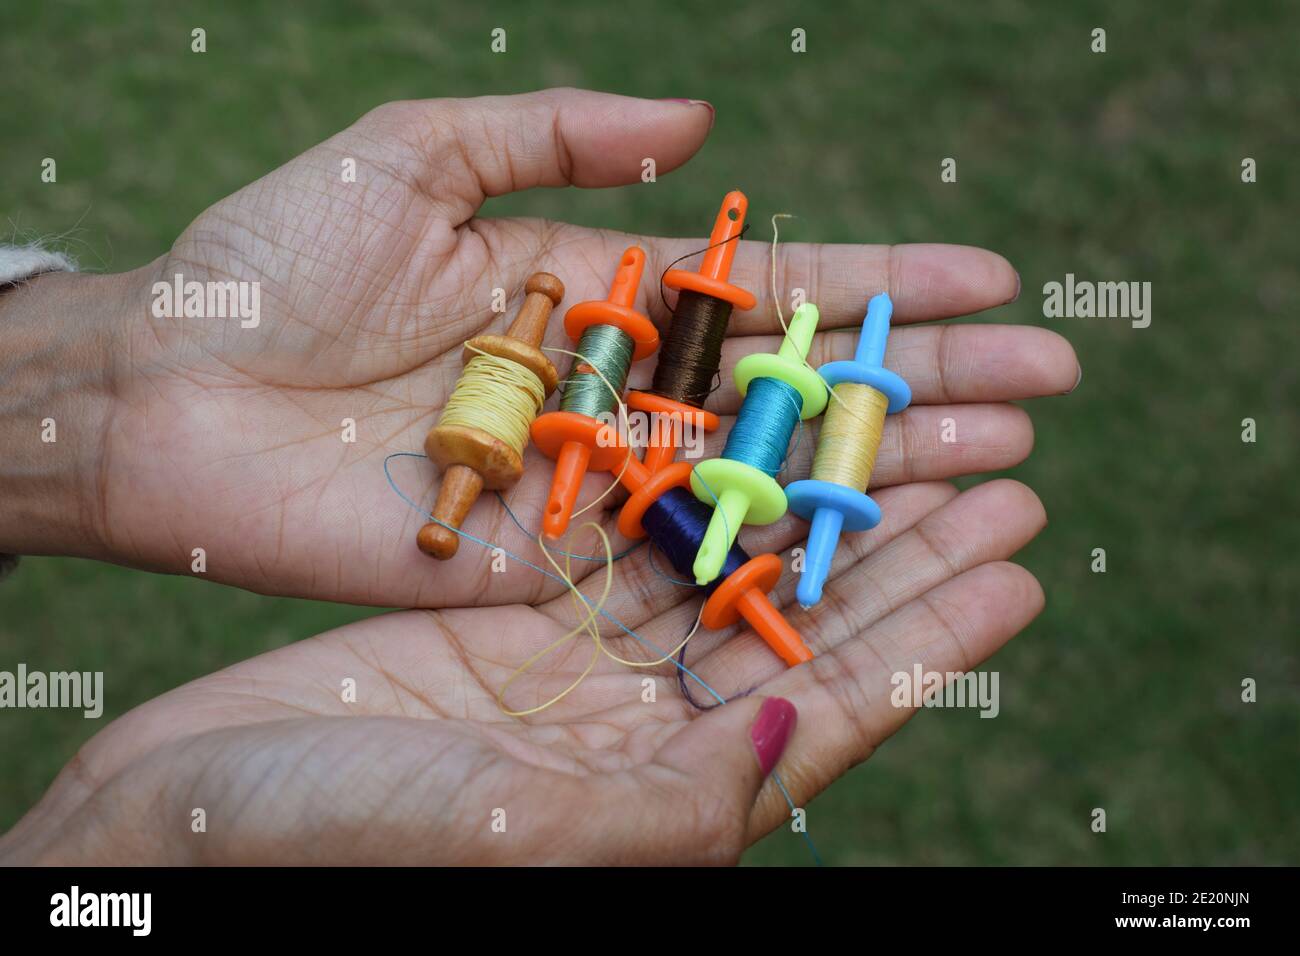 Collection of miniature spools, thread rolls called as Manjha or maanja in hand palms. Toy spools manja on the occasion of kite flying festival uttara Stock Photo